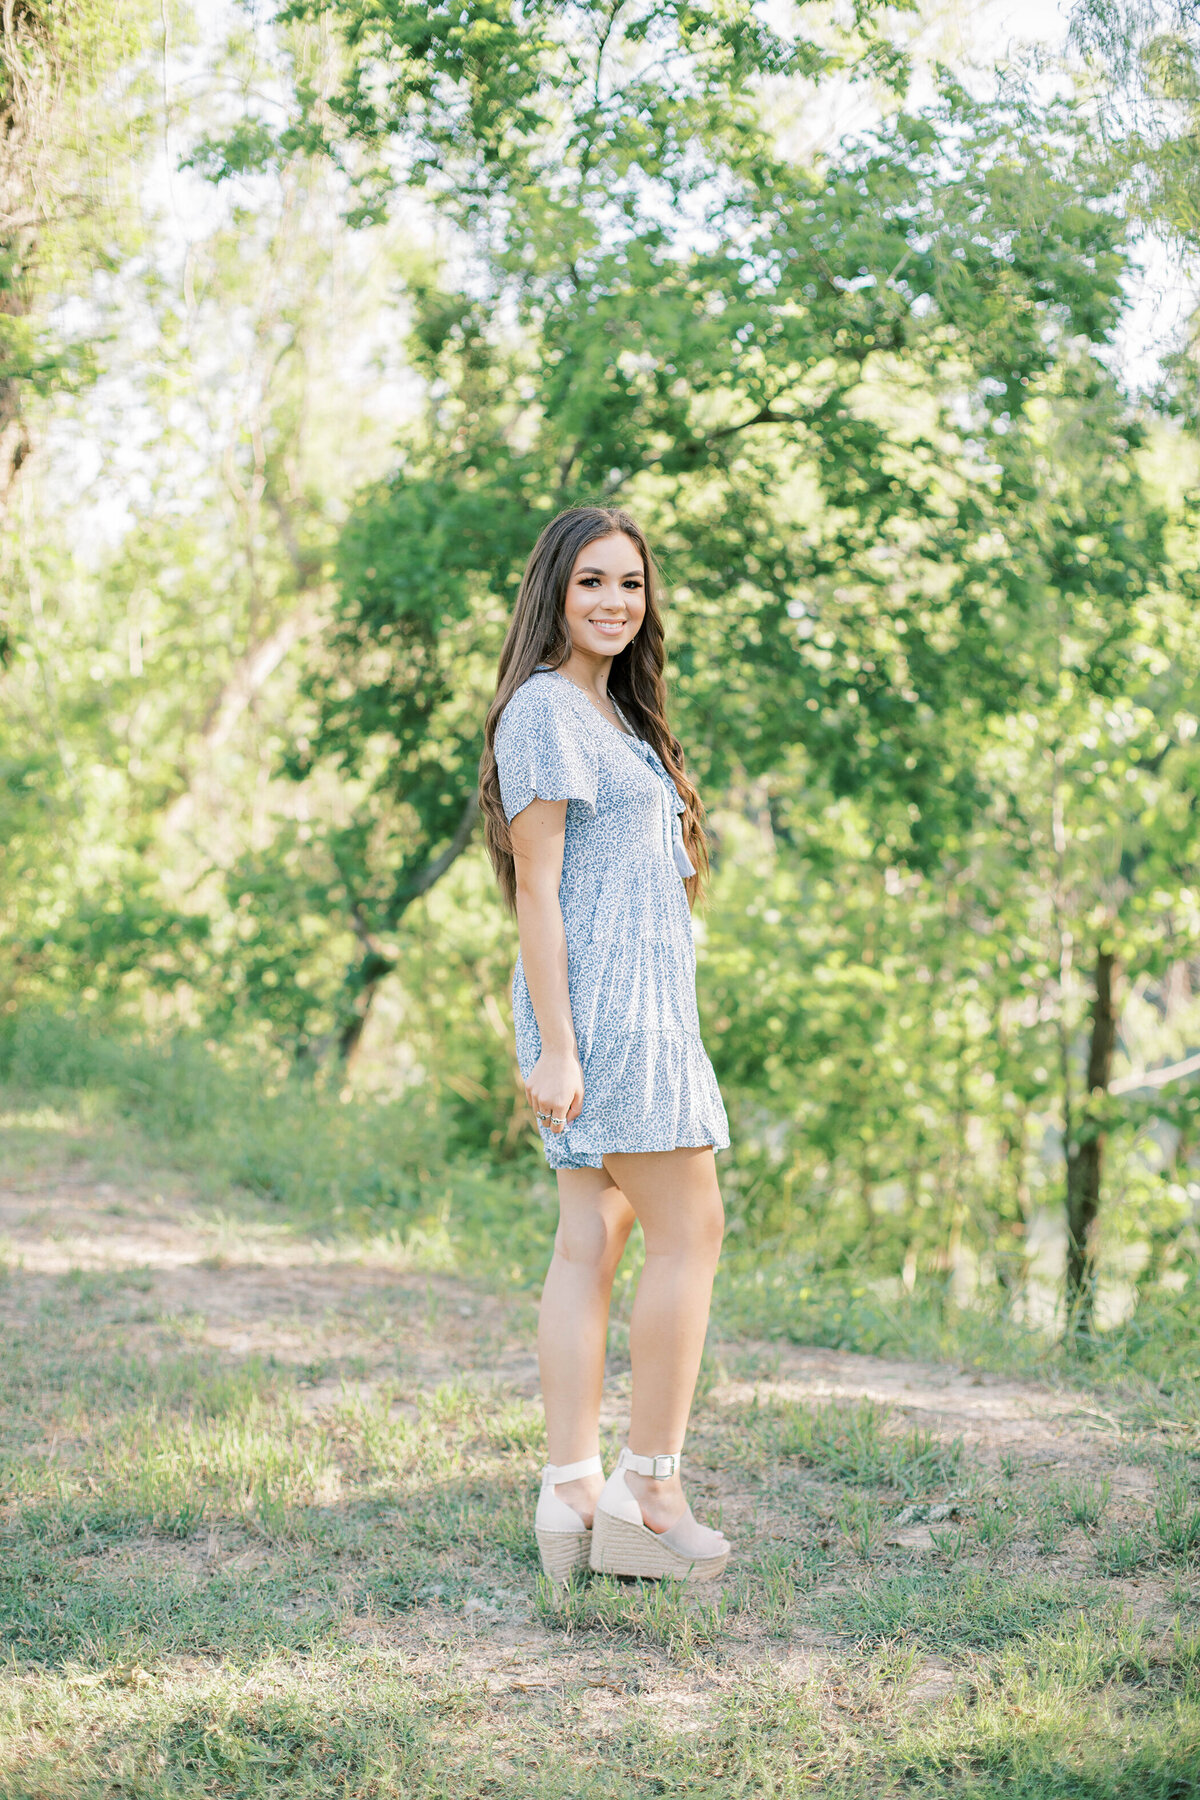 Ink & Willow Photography - Senior Photography Victoria TX - Chloe Hayden Seniors - ink&willow-chloe&hayden-8